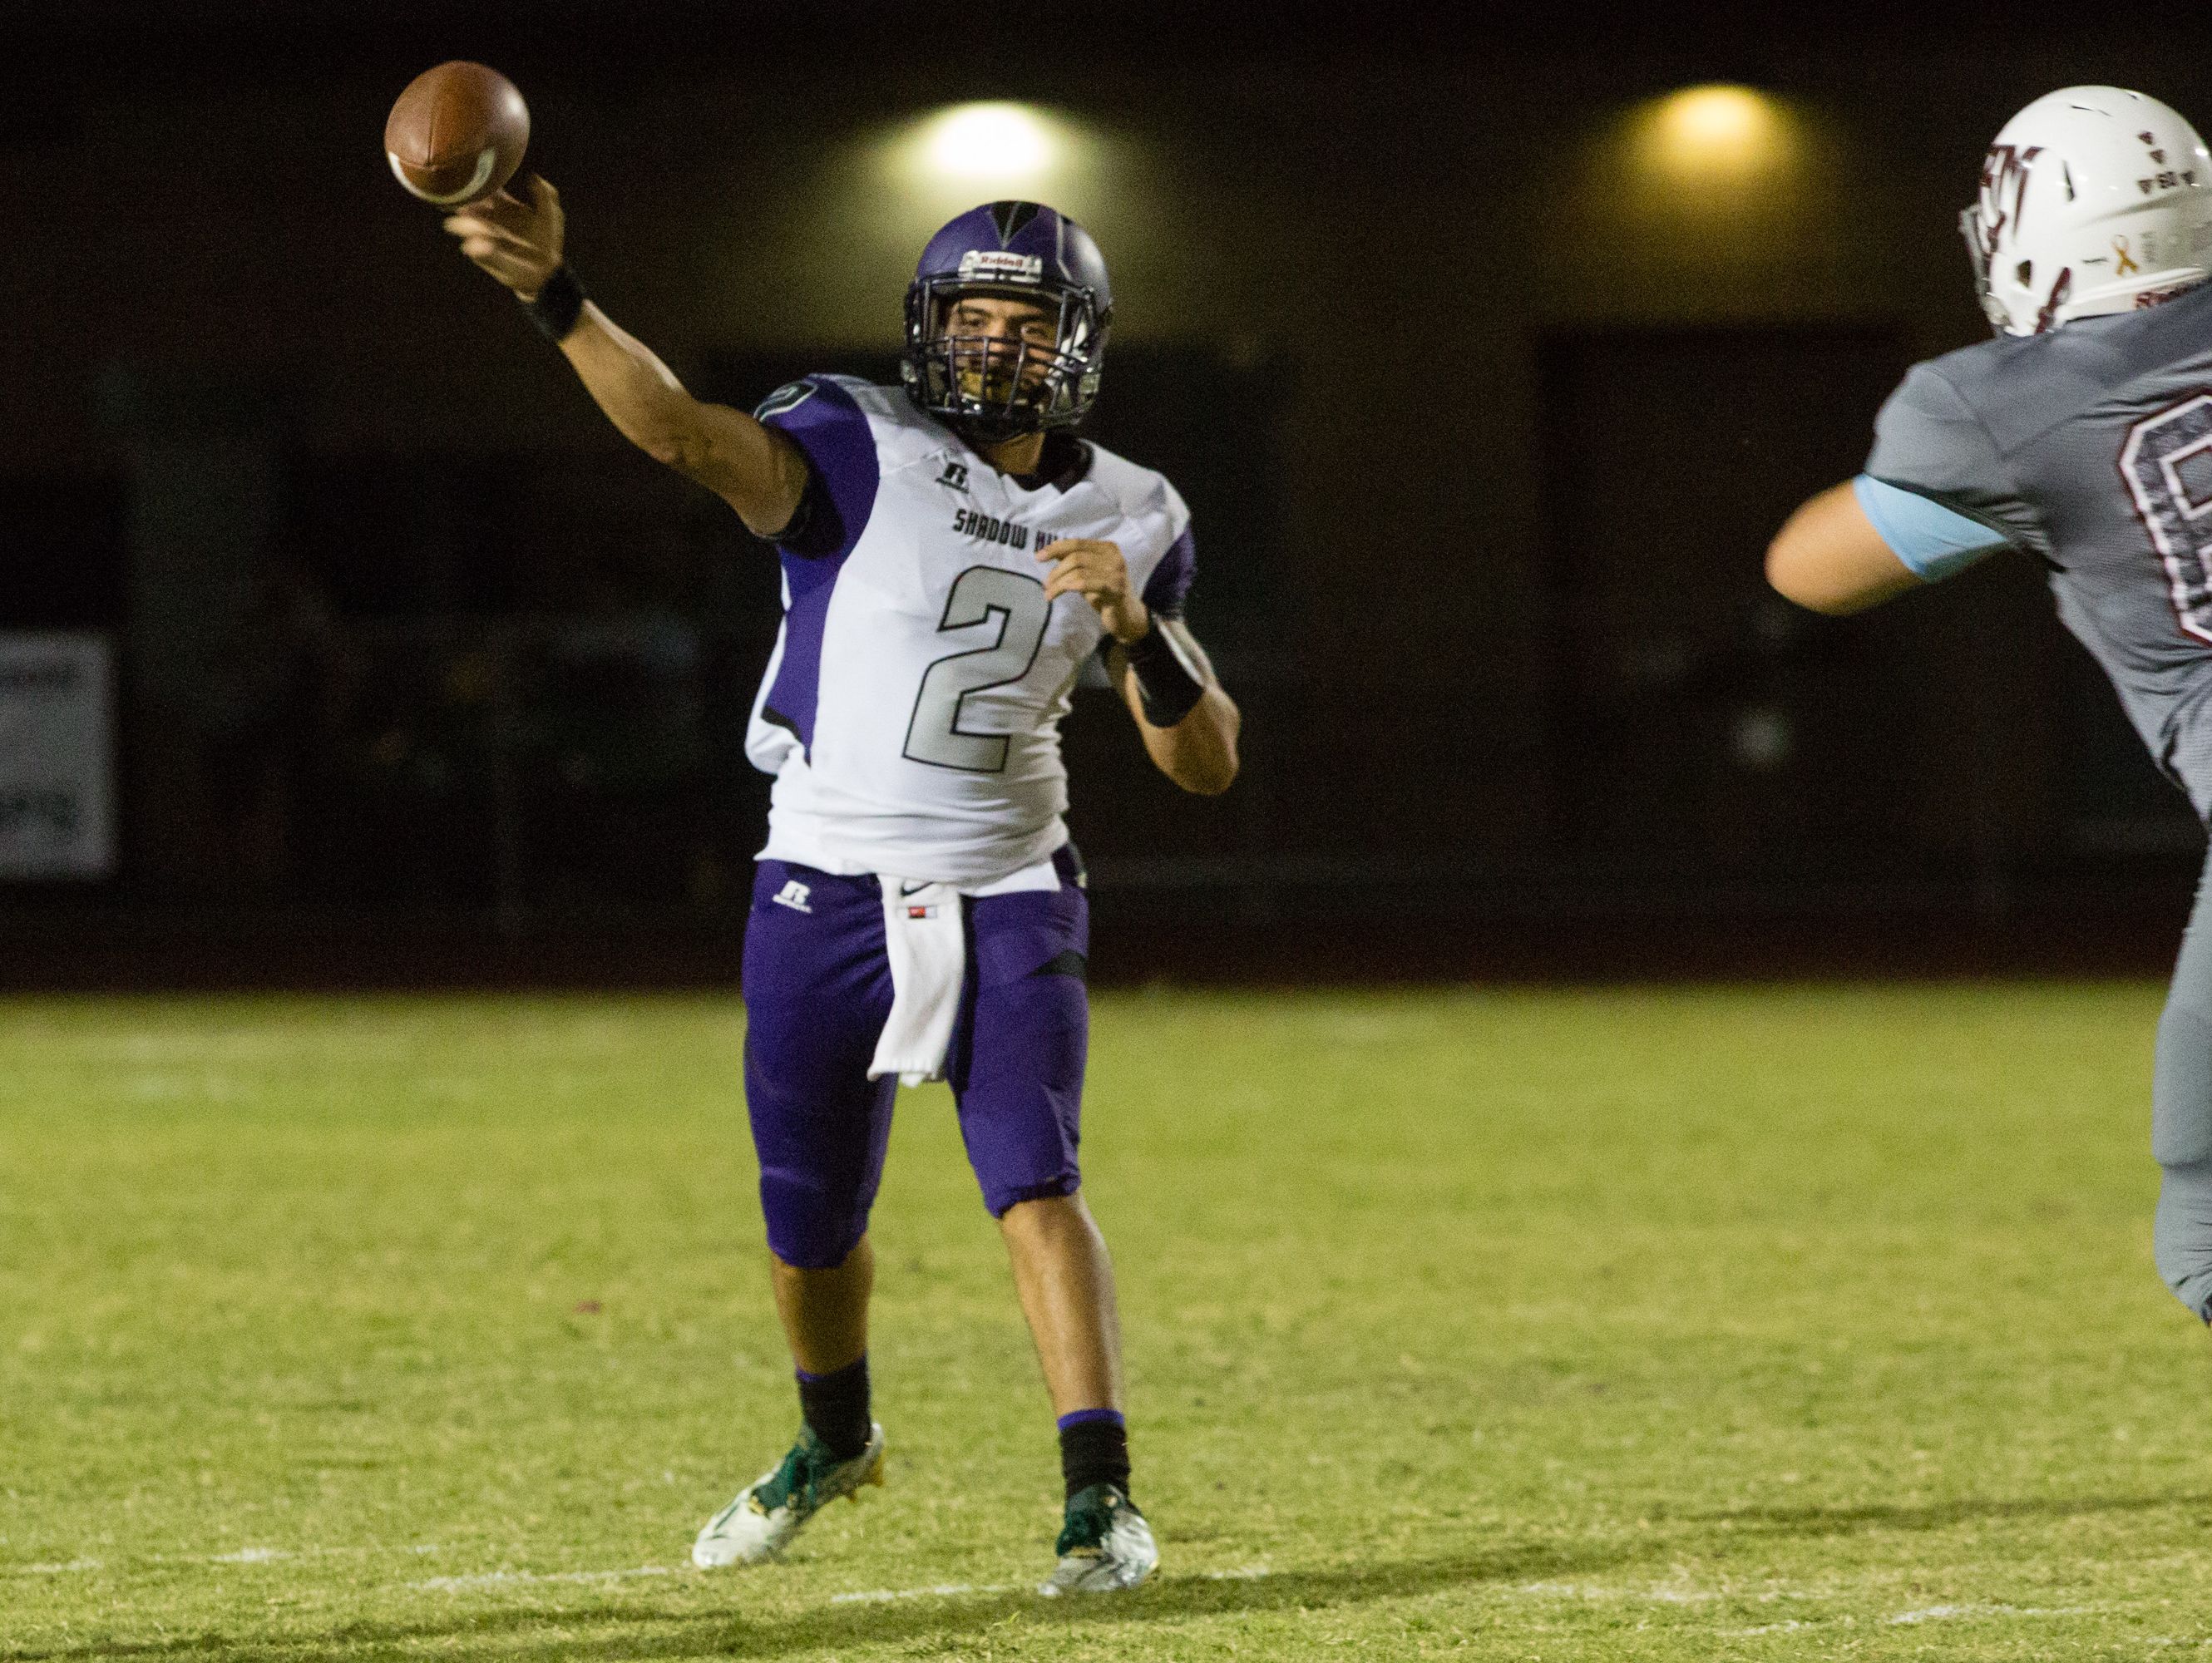 Seth Morales throws the ball for Shadow Hills, Friday, September 2, 2016.